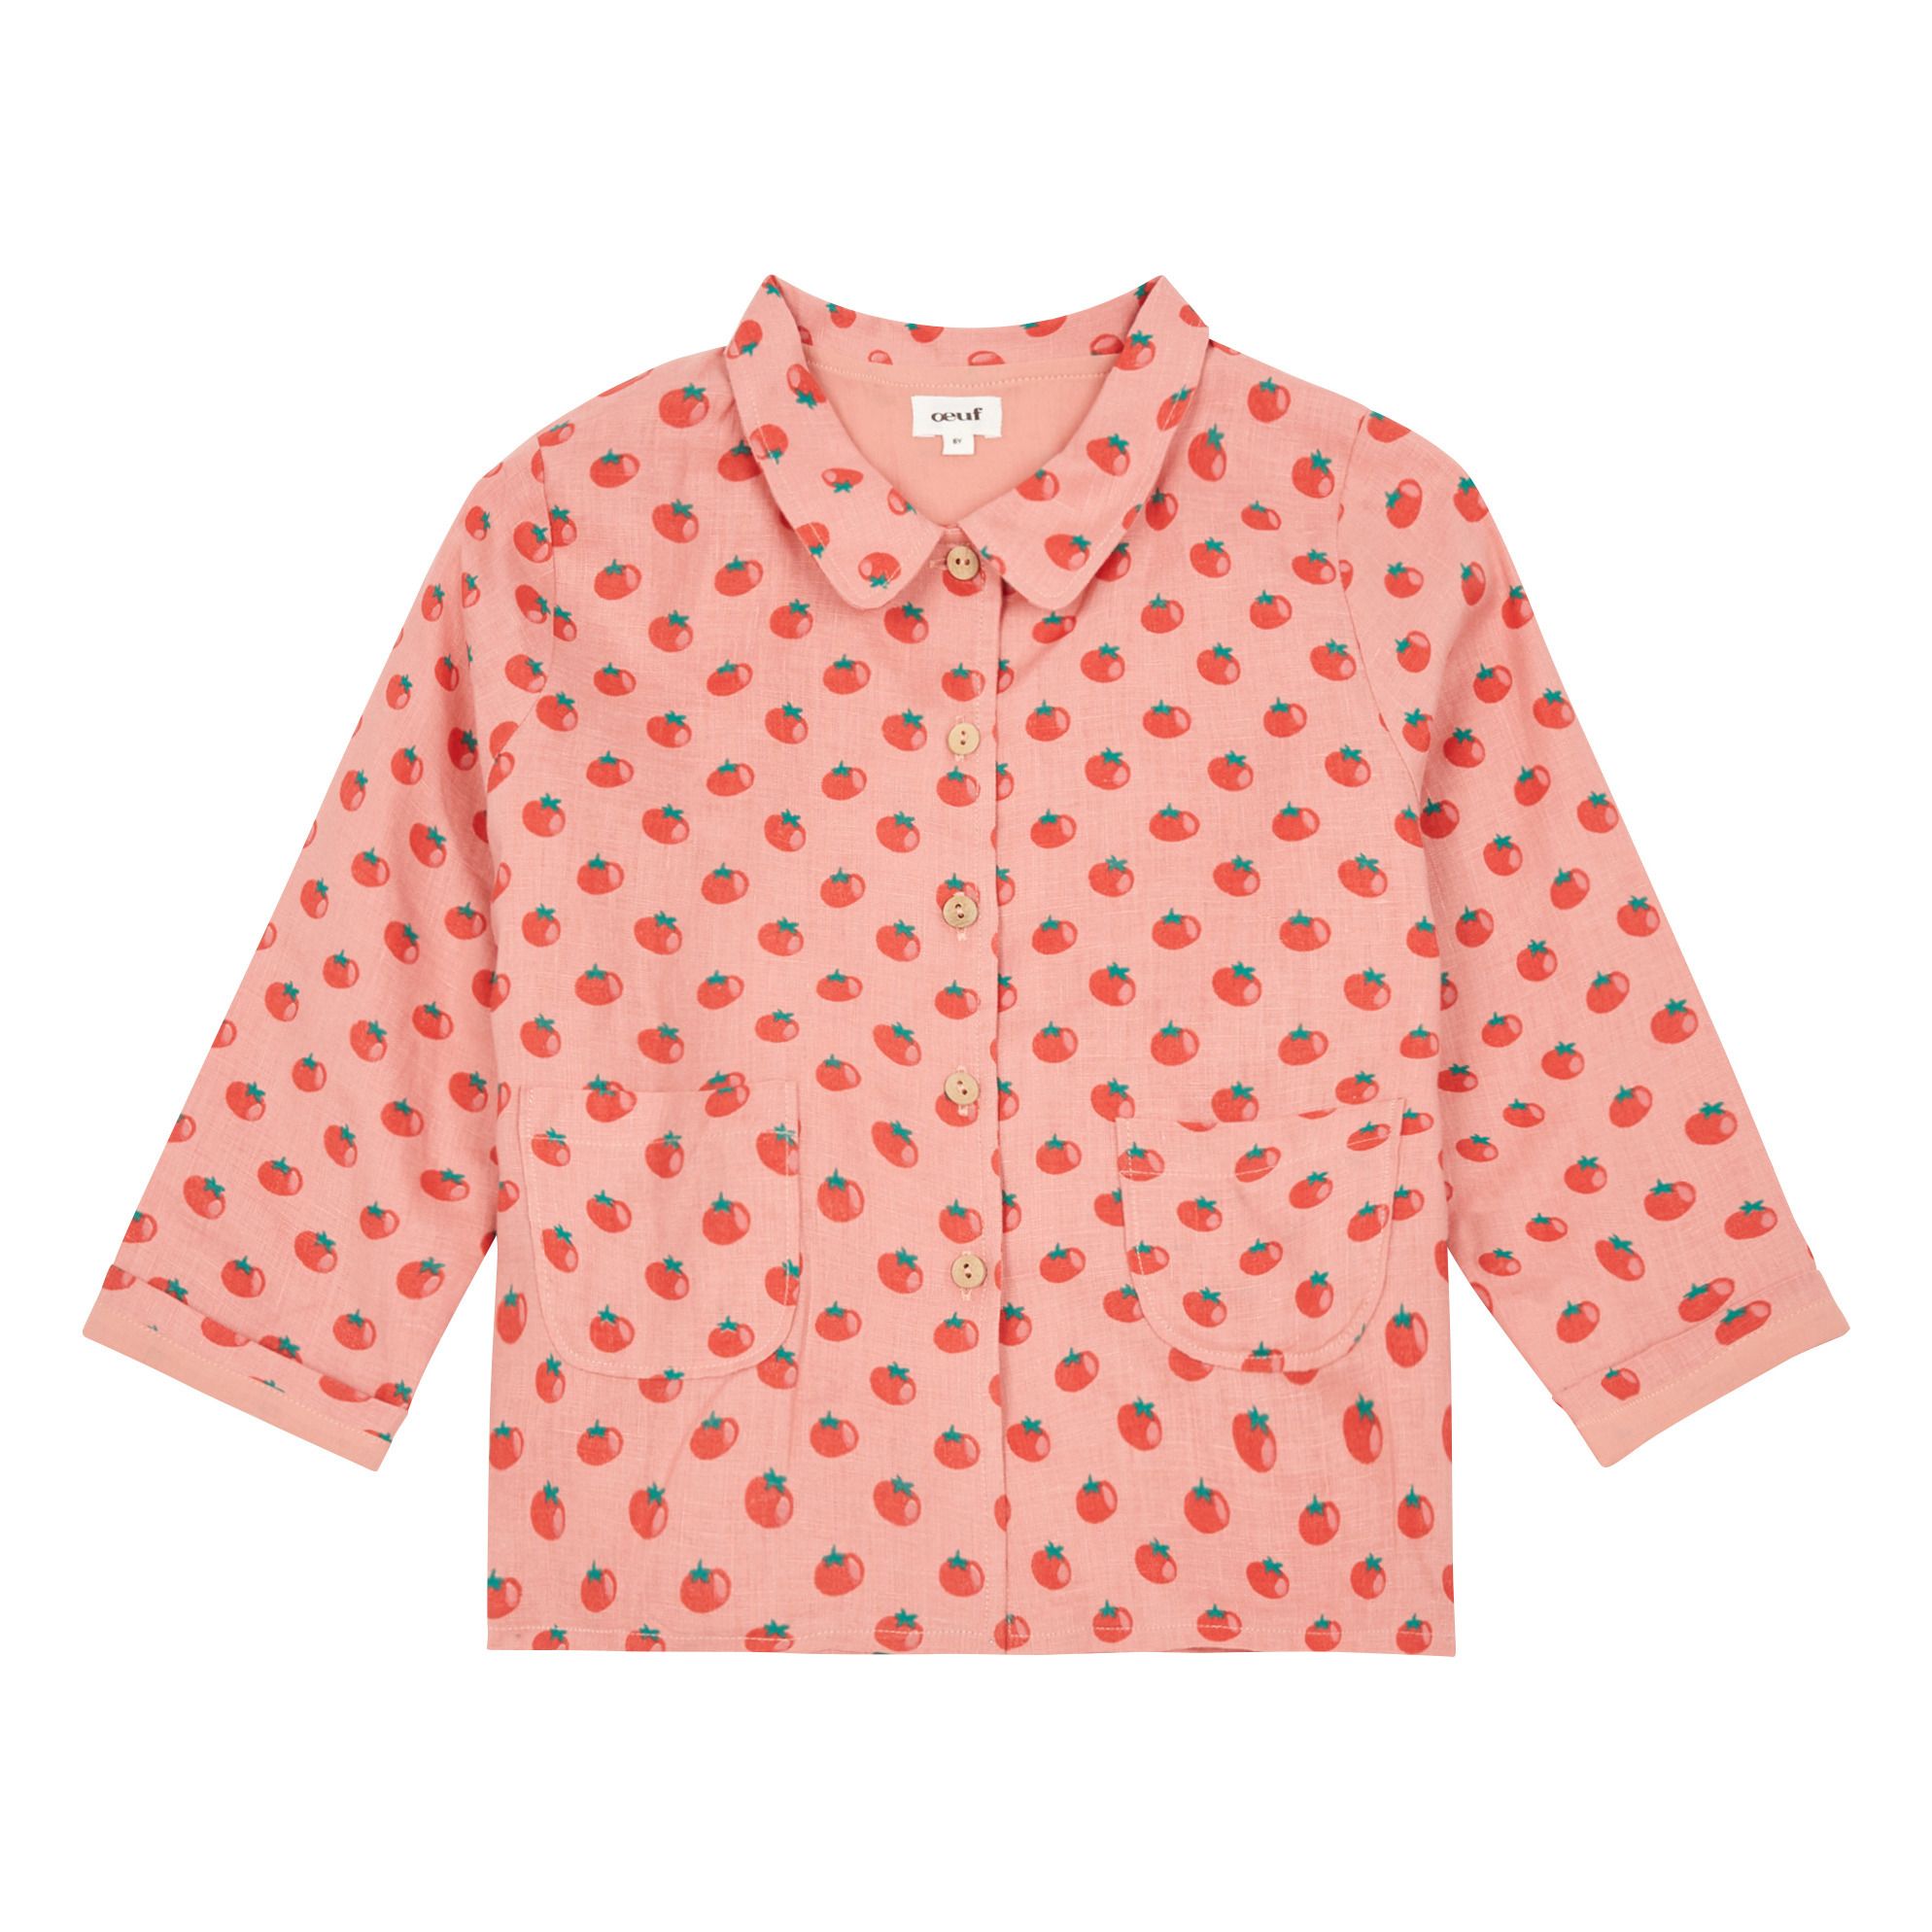 Oeuf NYC - Veste Lin Tomates - Fille - Rose